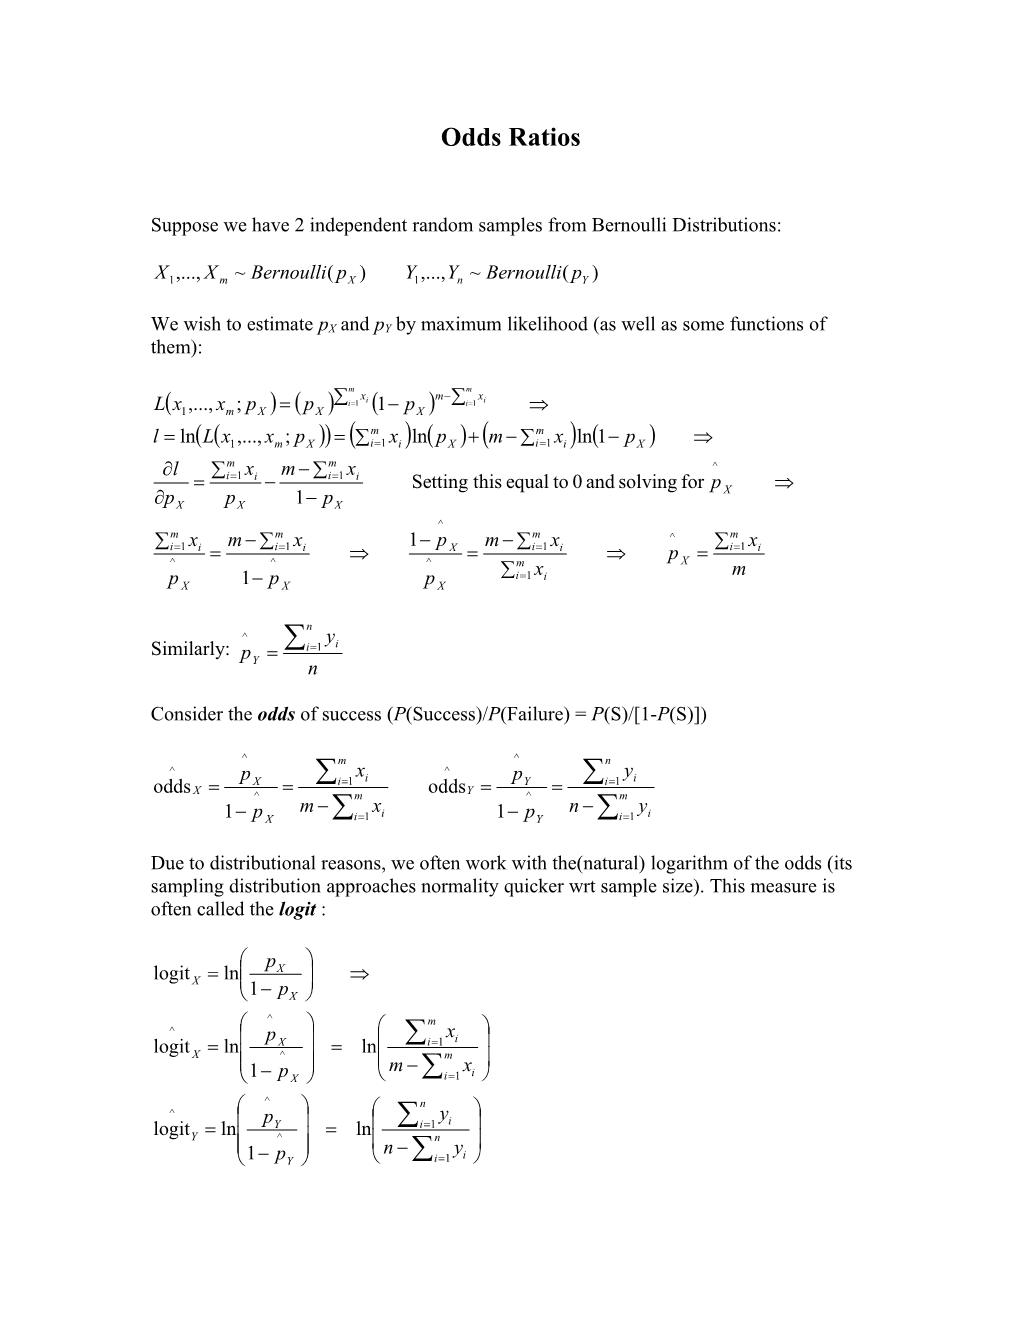 Suppose We Have 2 Independent Random Samples from Bernoulli Distributions